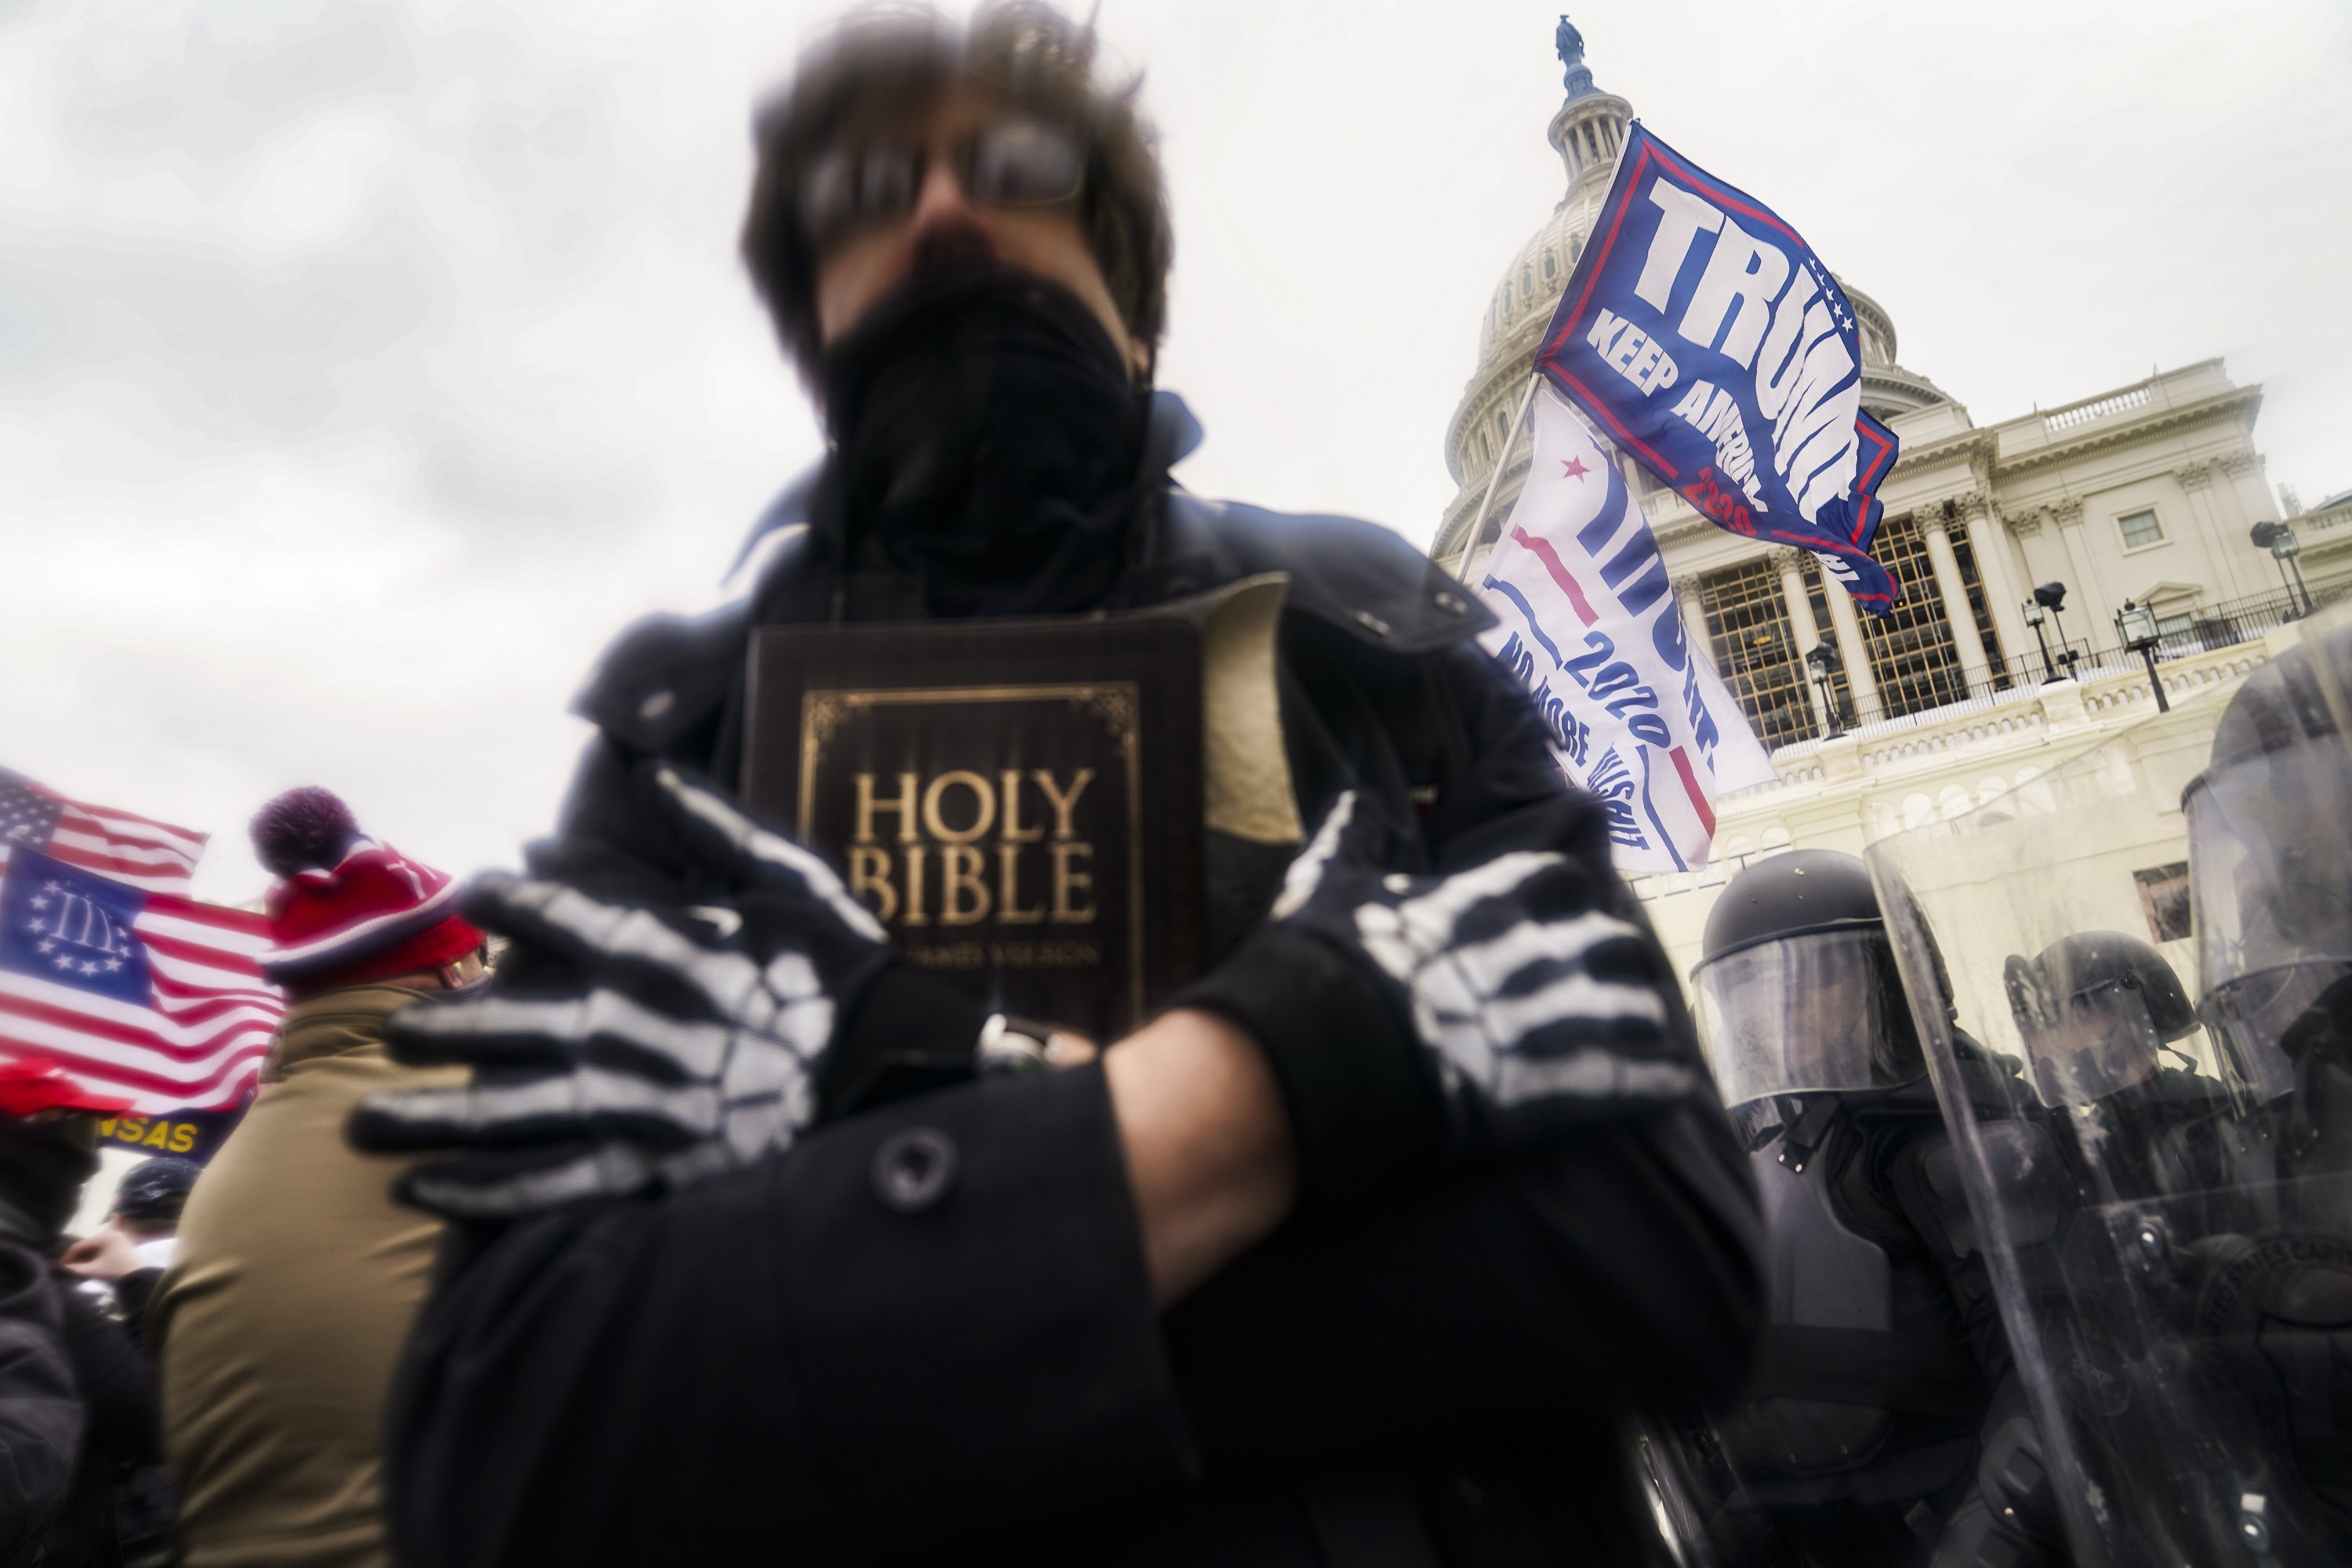 Christianity on display in Capitol revolt sparks new debate